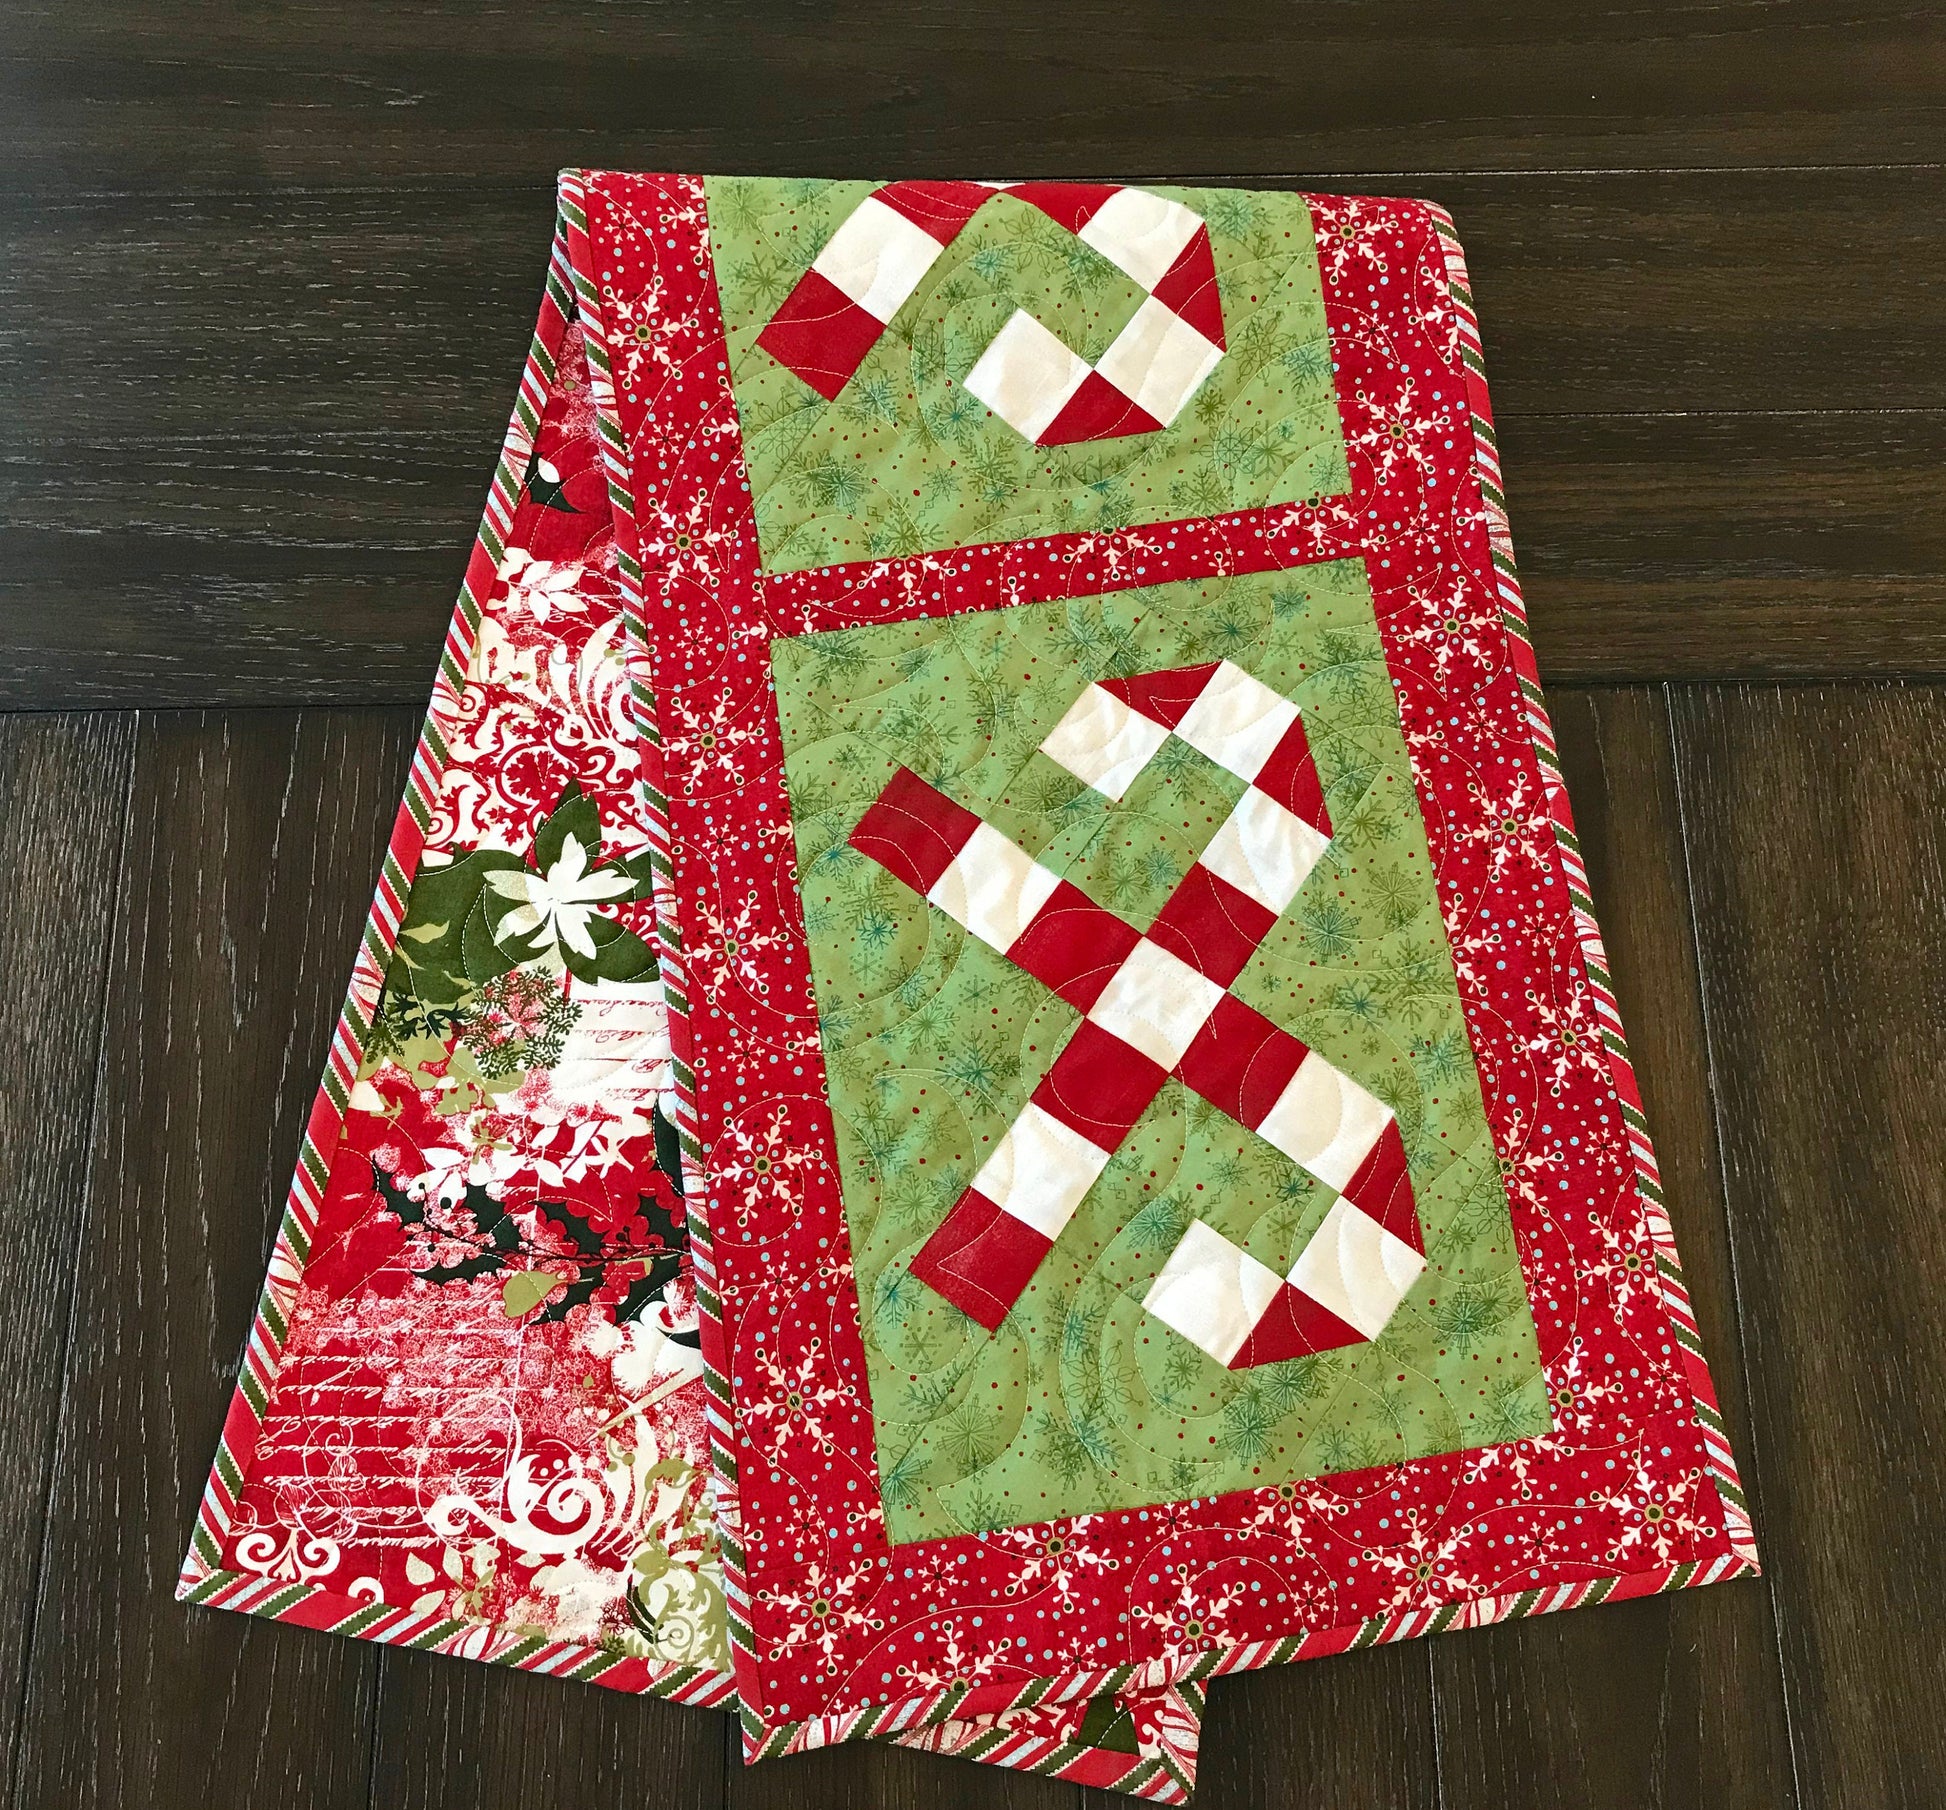 Digital pattern for a quilted Christmas table runner that has candy canes in three sections surrounded by a border.